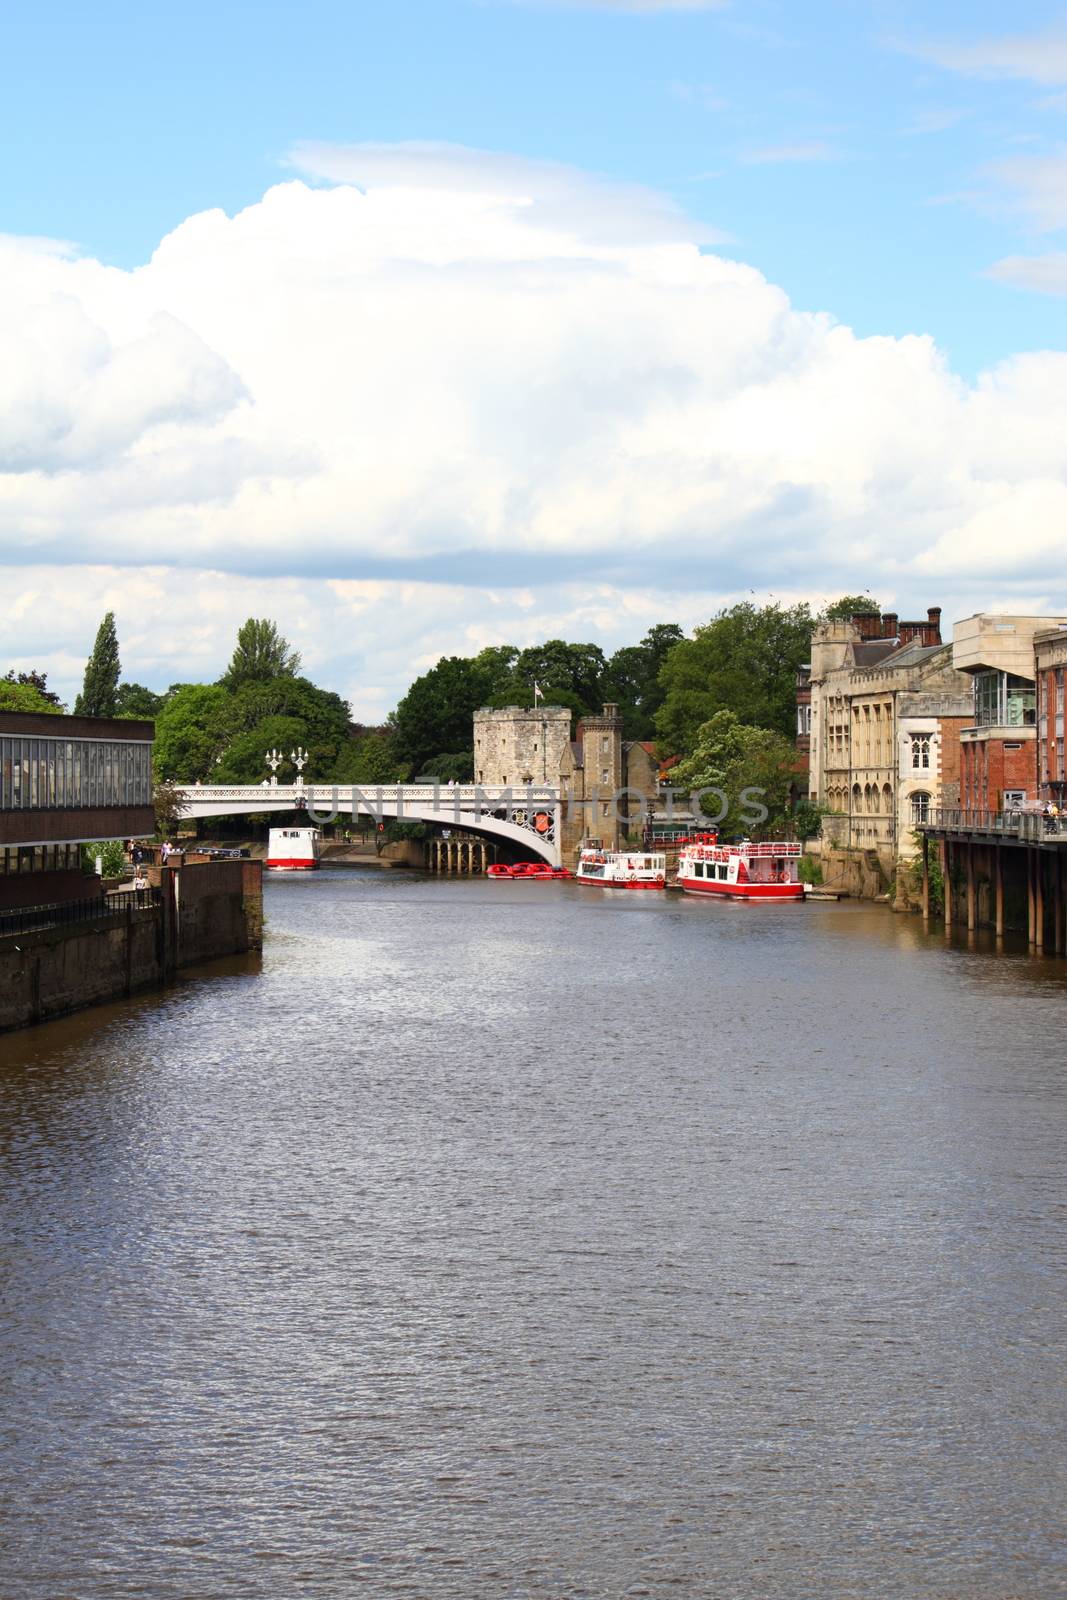 river Ouse in the City of York Yorkshire UK showing the Lendal Bridge by mitzy